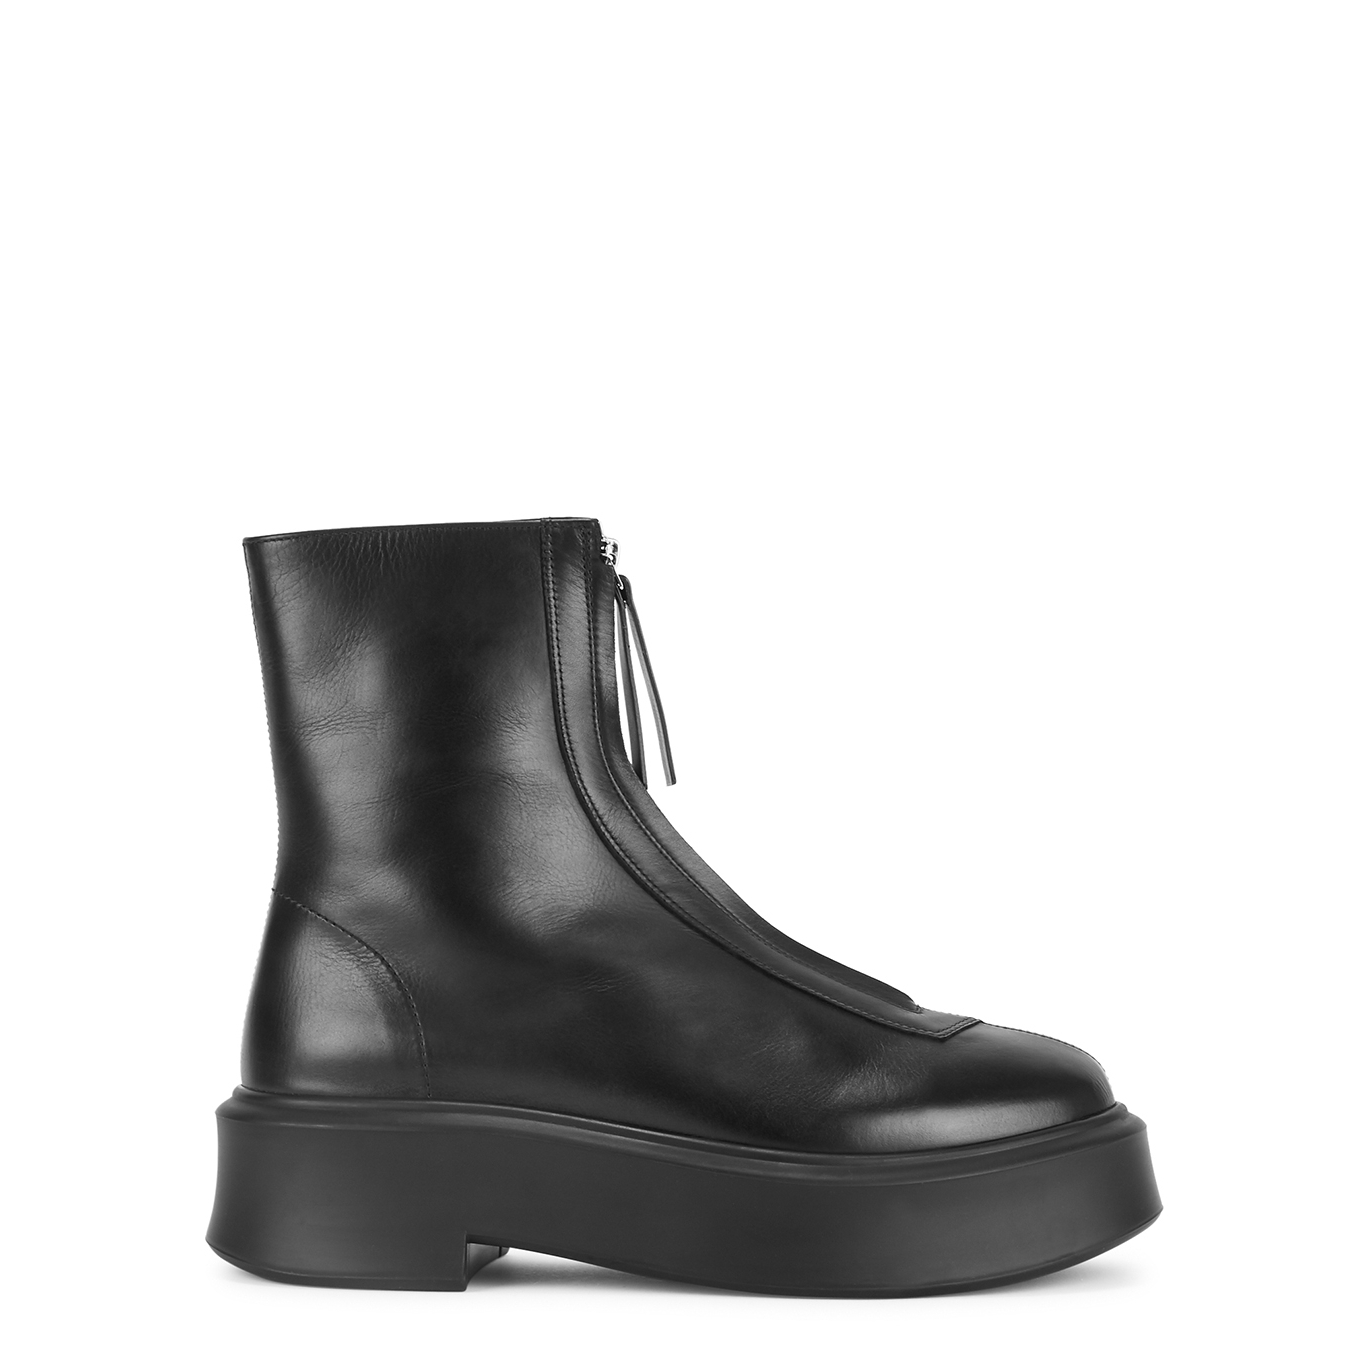 Zipped 1 Leather Flatform Ankle Boots